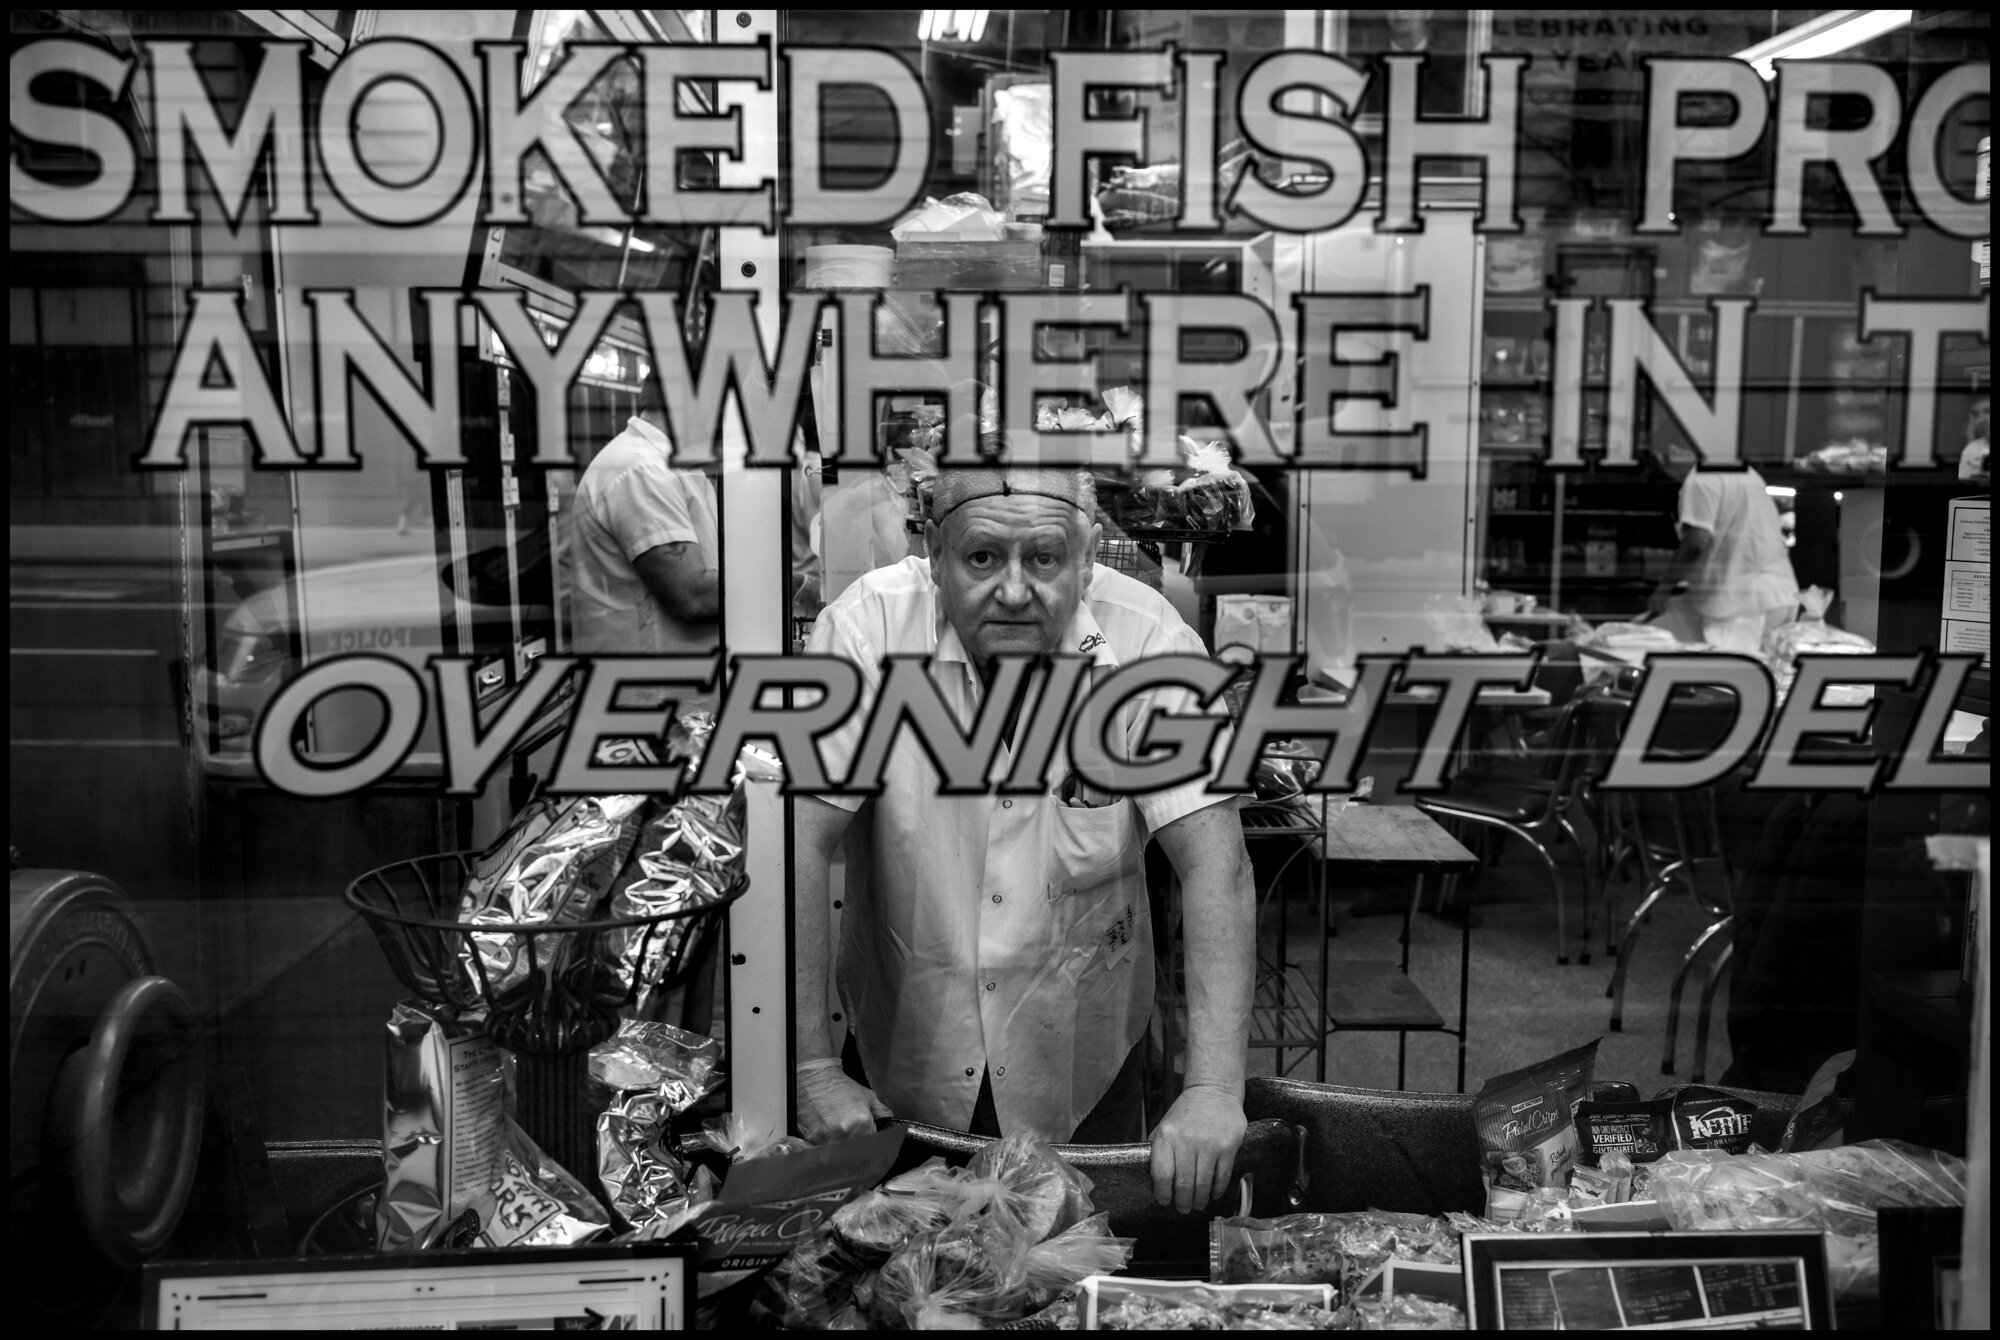  Joe who works at Barney Green Grass-The Sturgeon King, open for deliveries.   Amsterdam Ave. March 24, 2020. © Peter Turnley.   ID# 03-005 